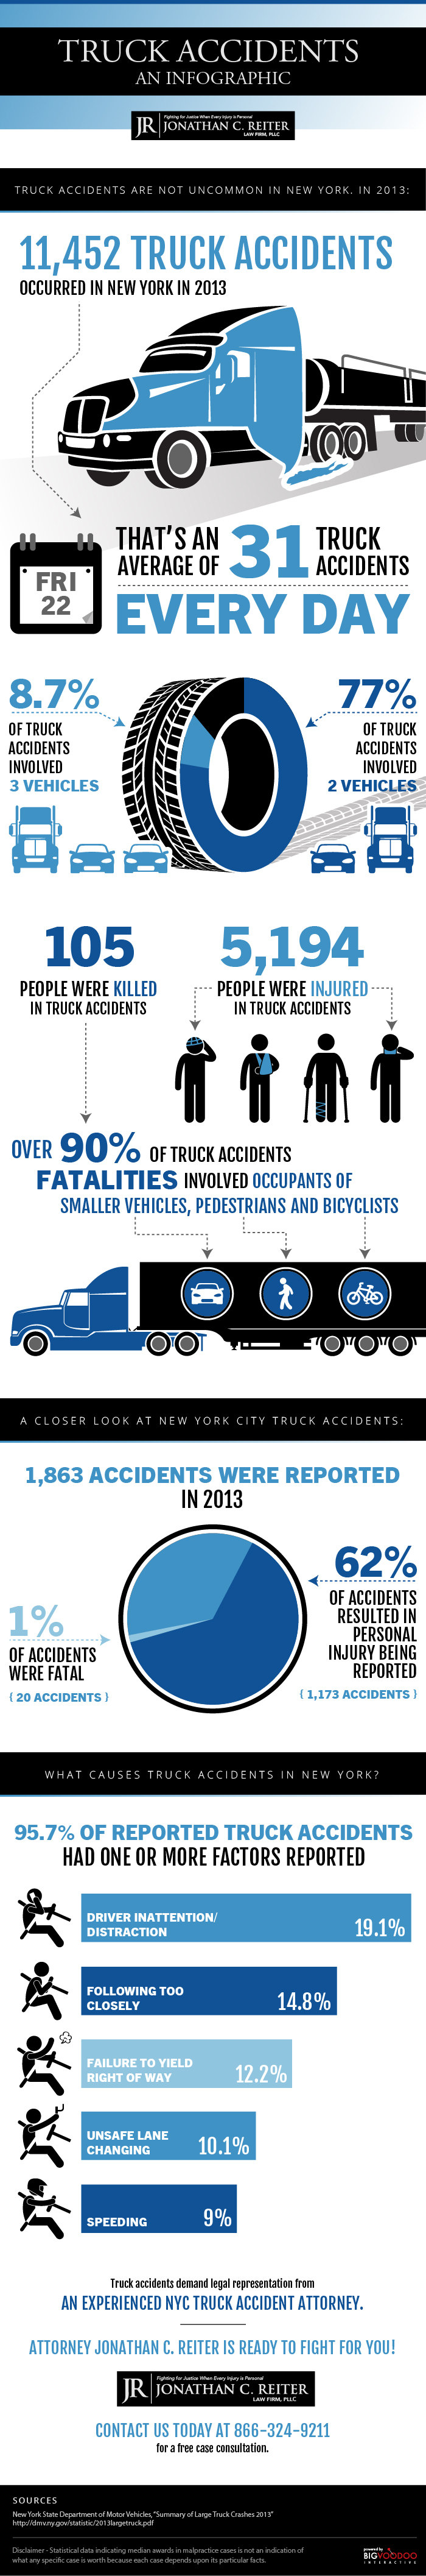 infographtruckaccidents